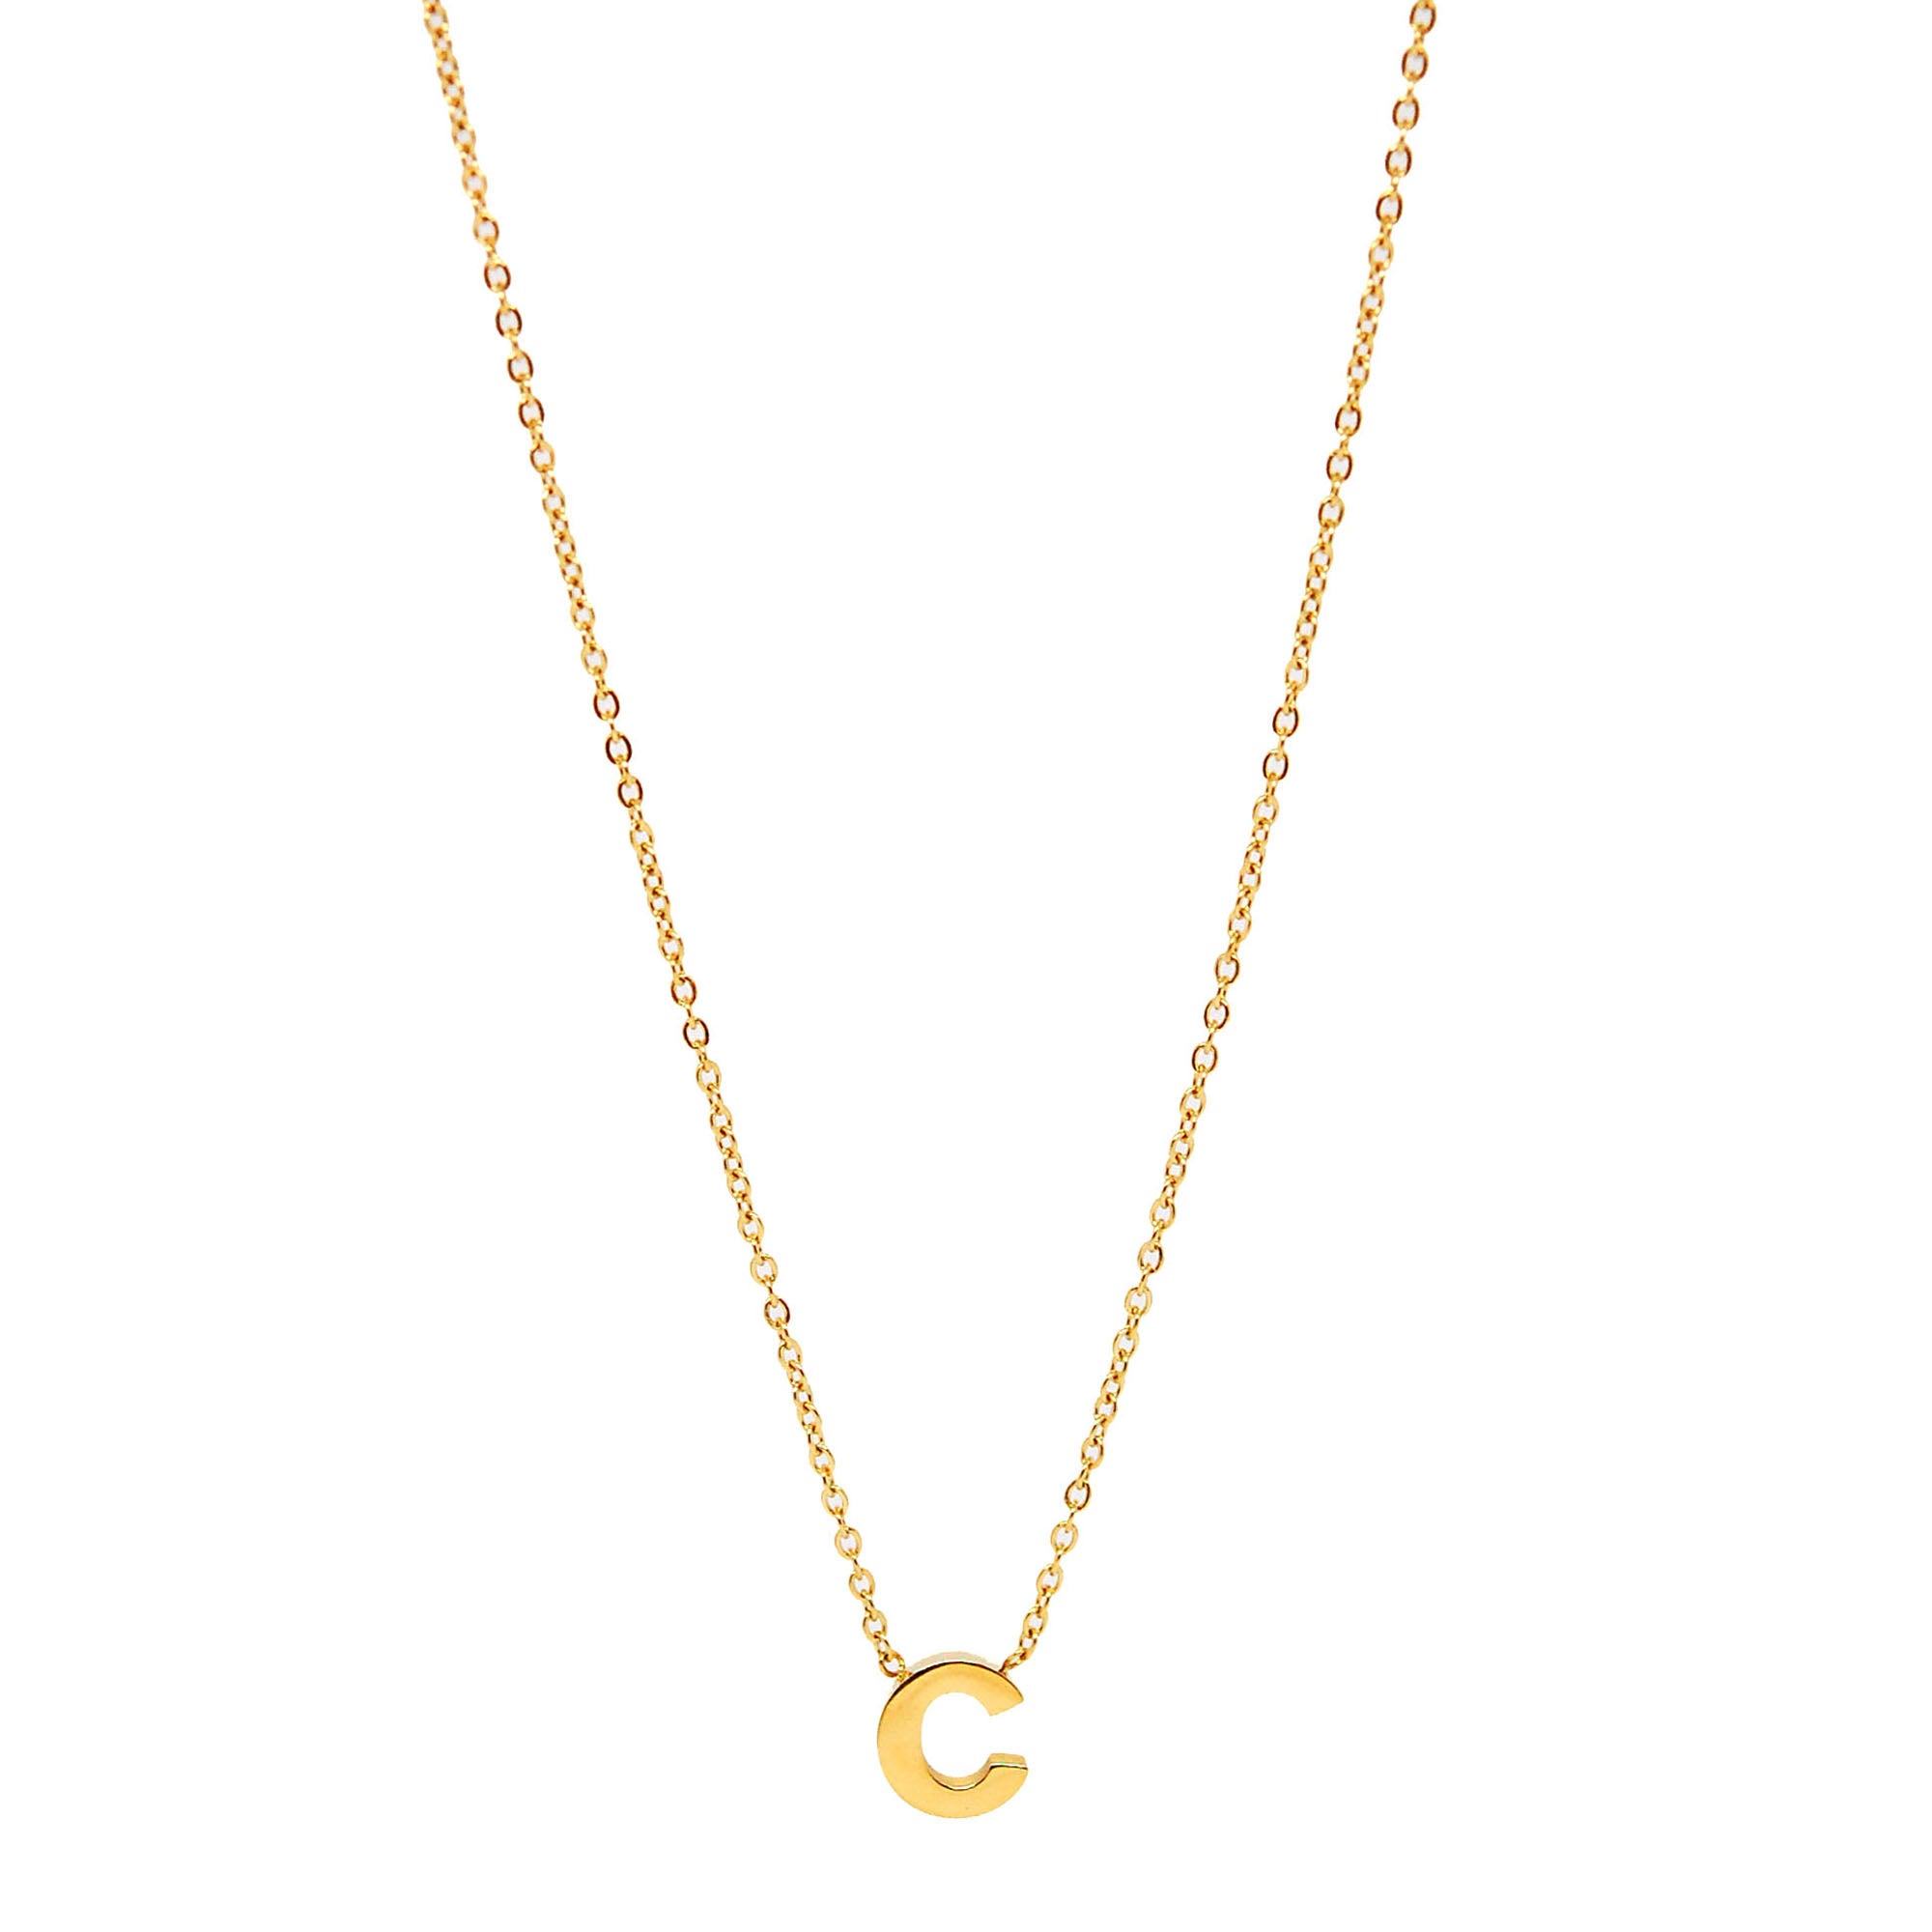 All IPG Fixed Letter Necklace (18" Chain)